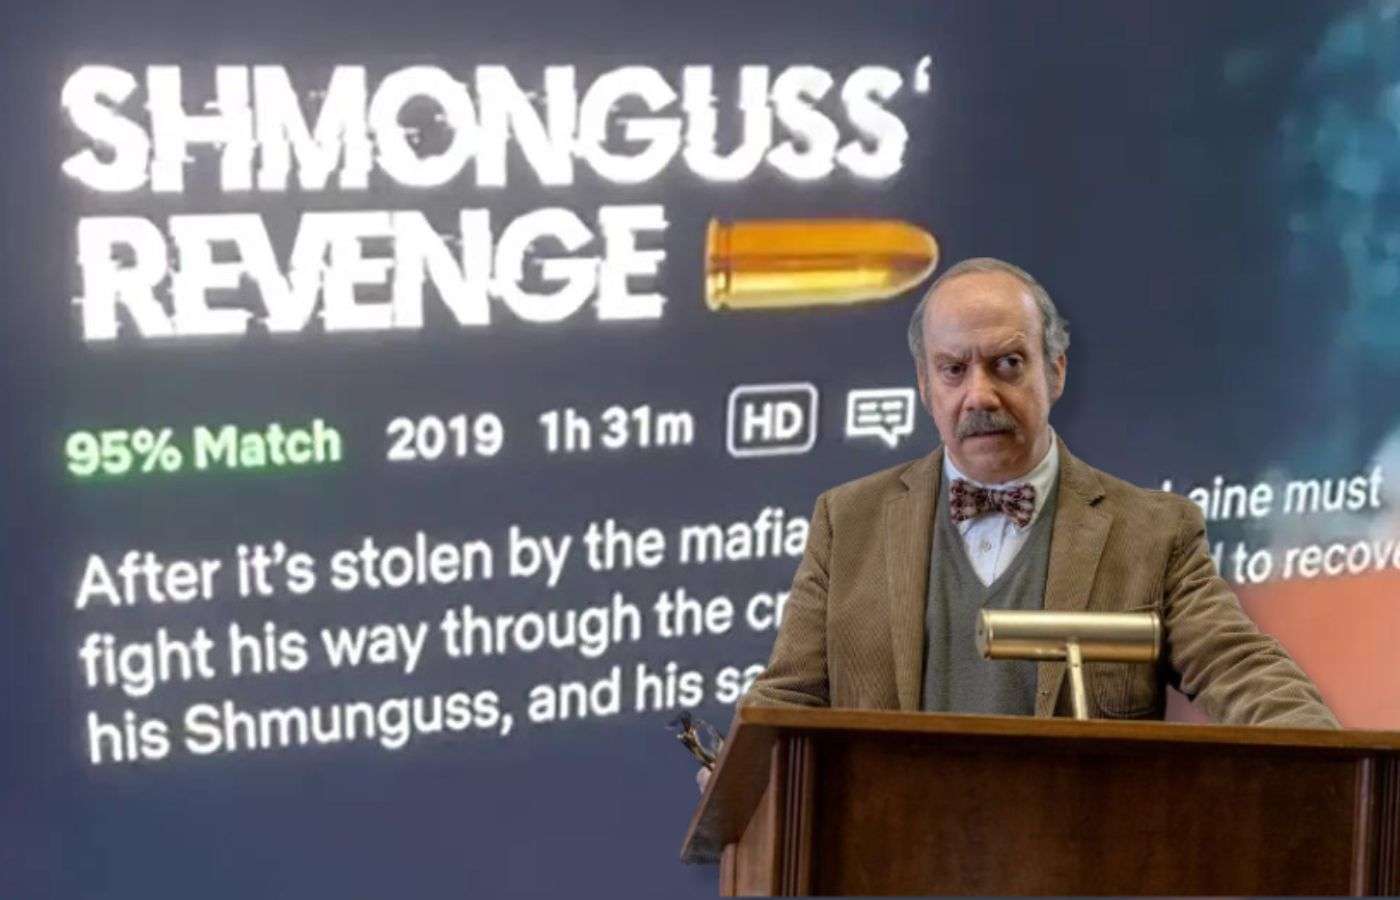 Paul Giamatti in The Holdovers and the bogus Shmunguss category on Netflix